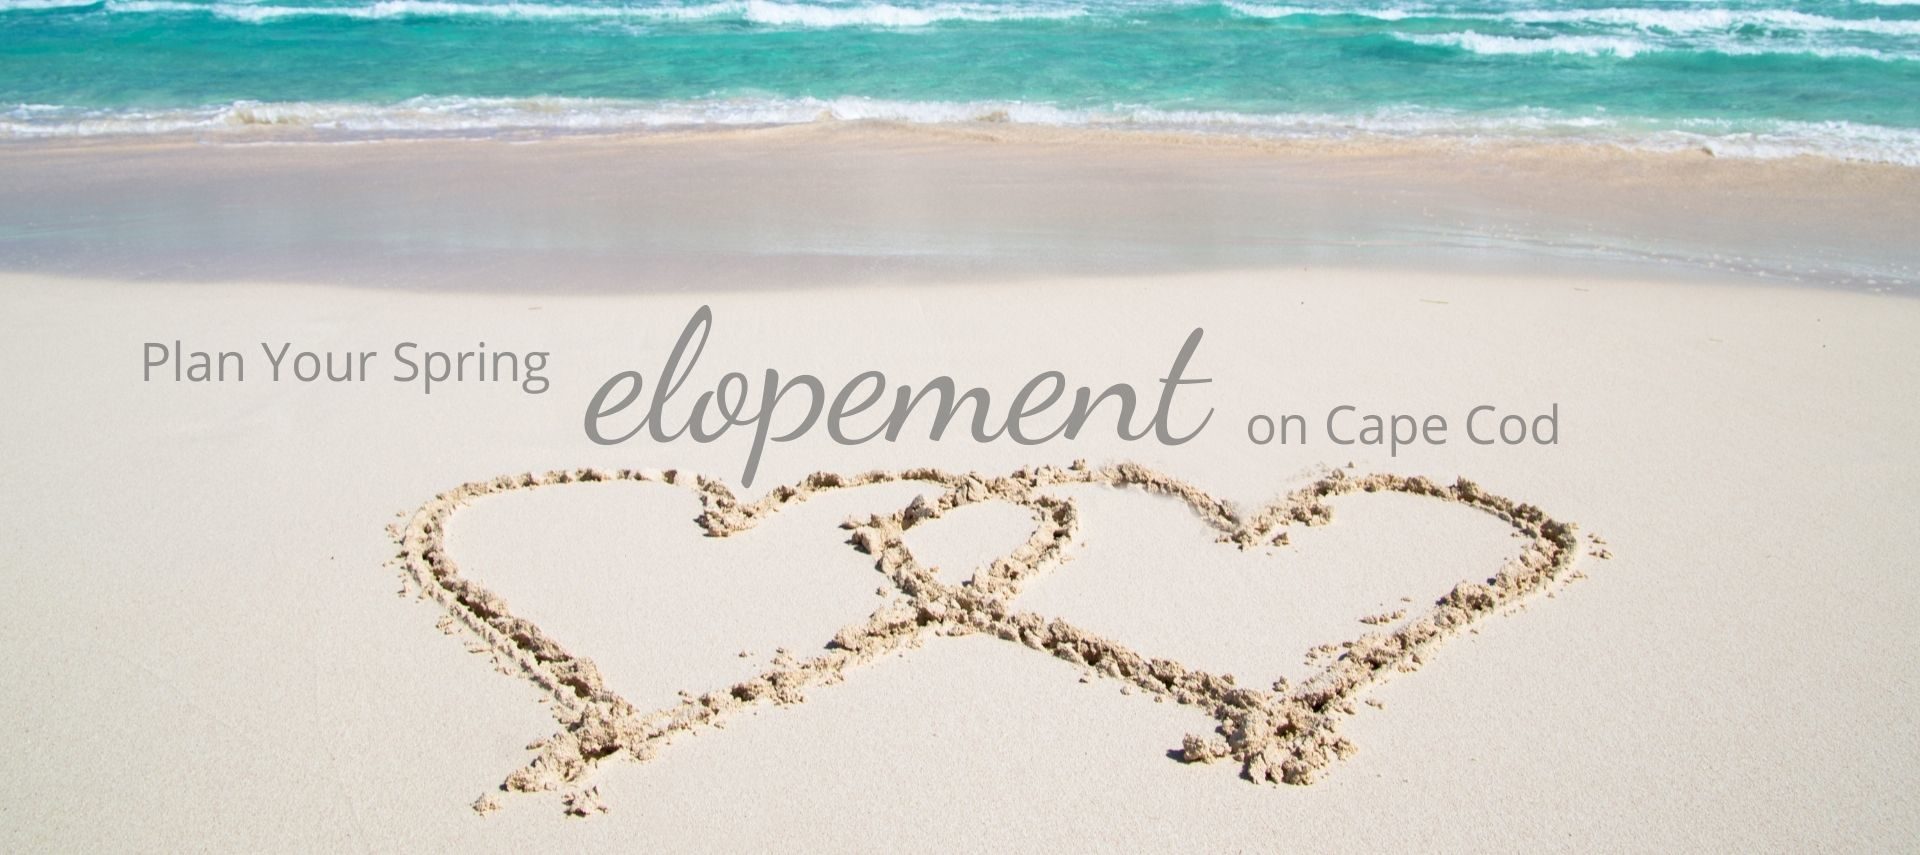 Two hearts drawn on a sandy beach with text “Plan Your Spring Elopement on Cape Cod”